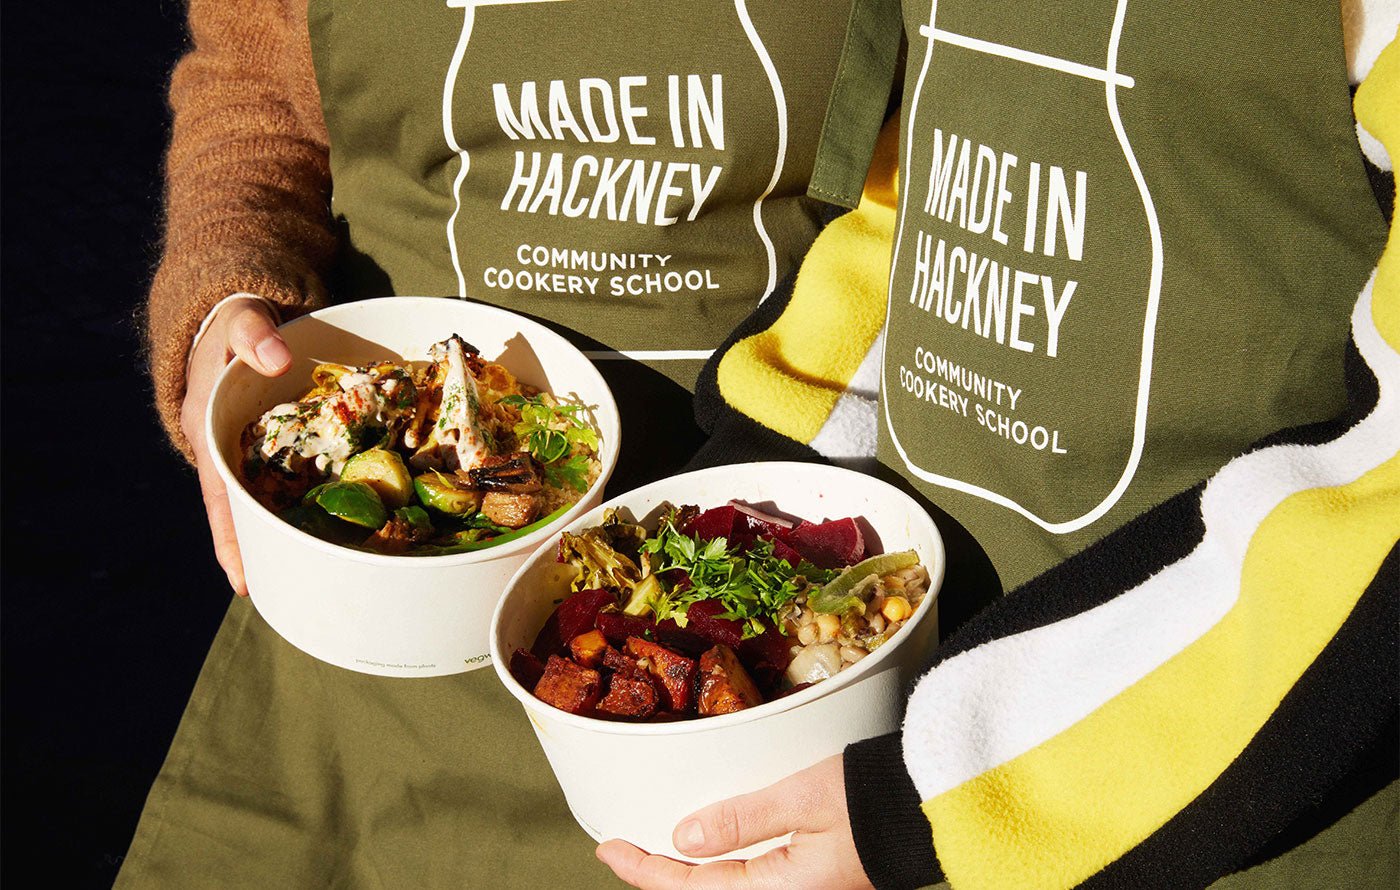 Made In Hackney and Clearspring join forces to provide 30,000 free plant-based meals - Clearspring